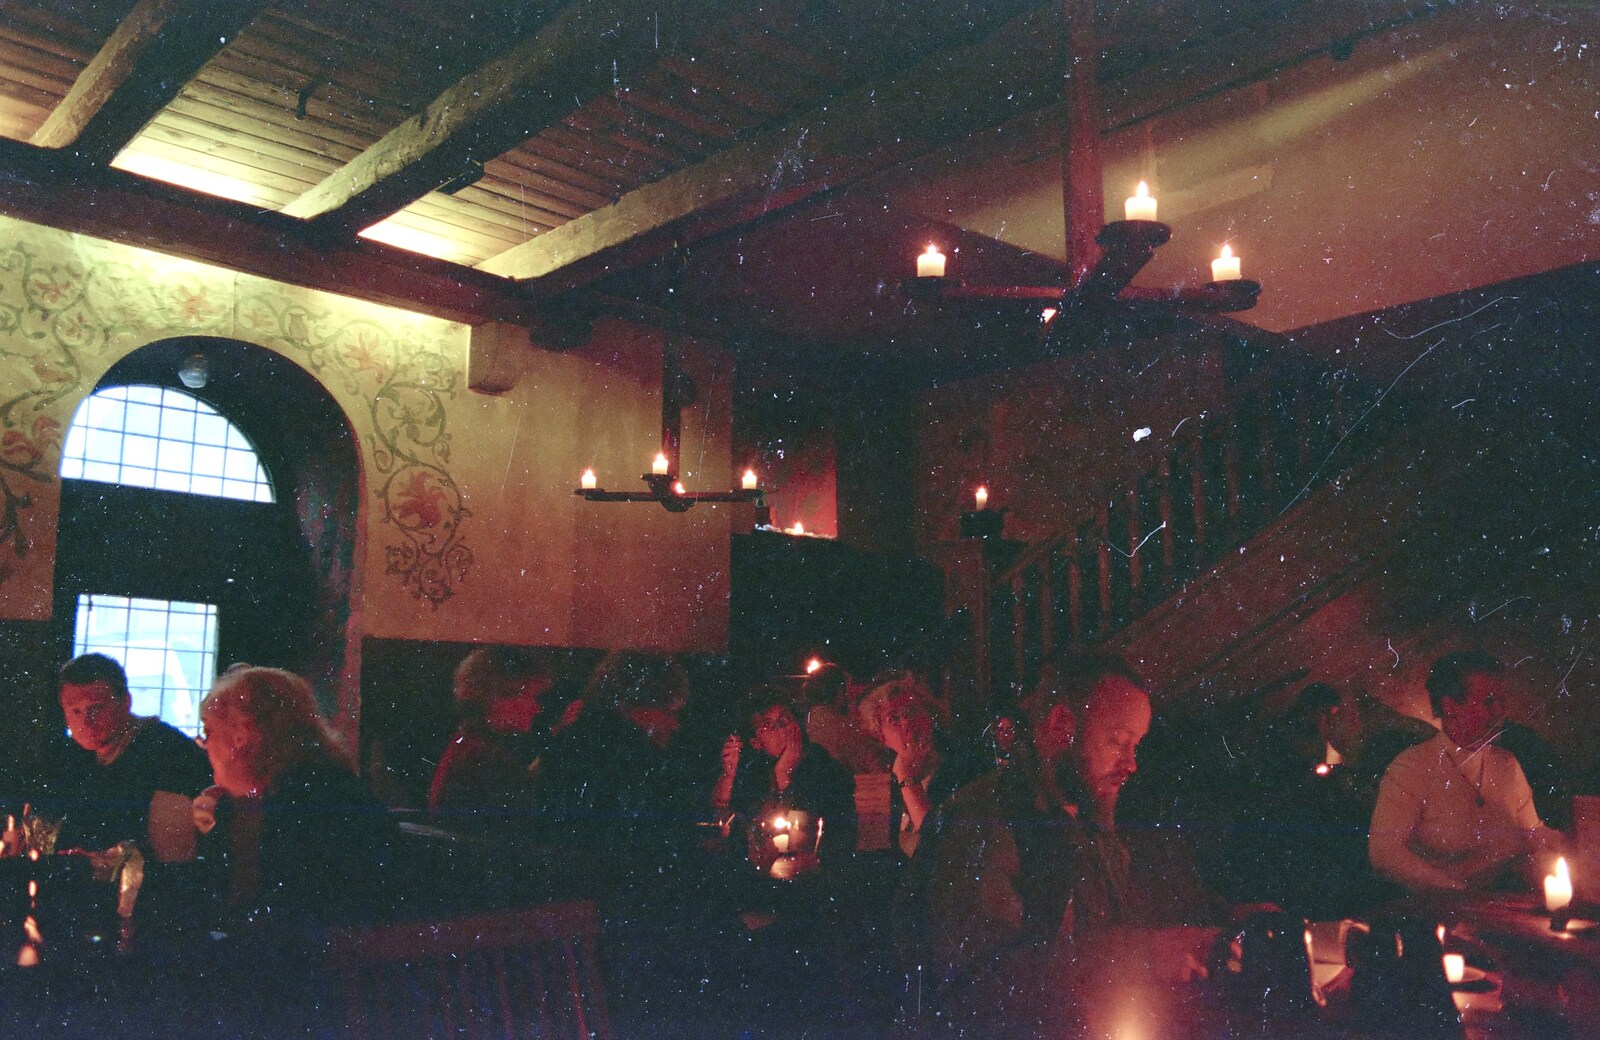 The candle-lit interior of Old Hansa restaurant from A Day Trip to Tallinn, Estonia - 2nd December 1999